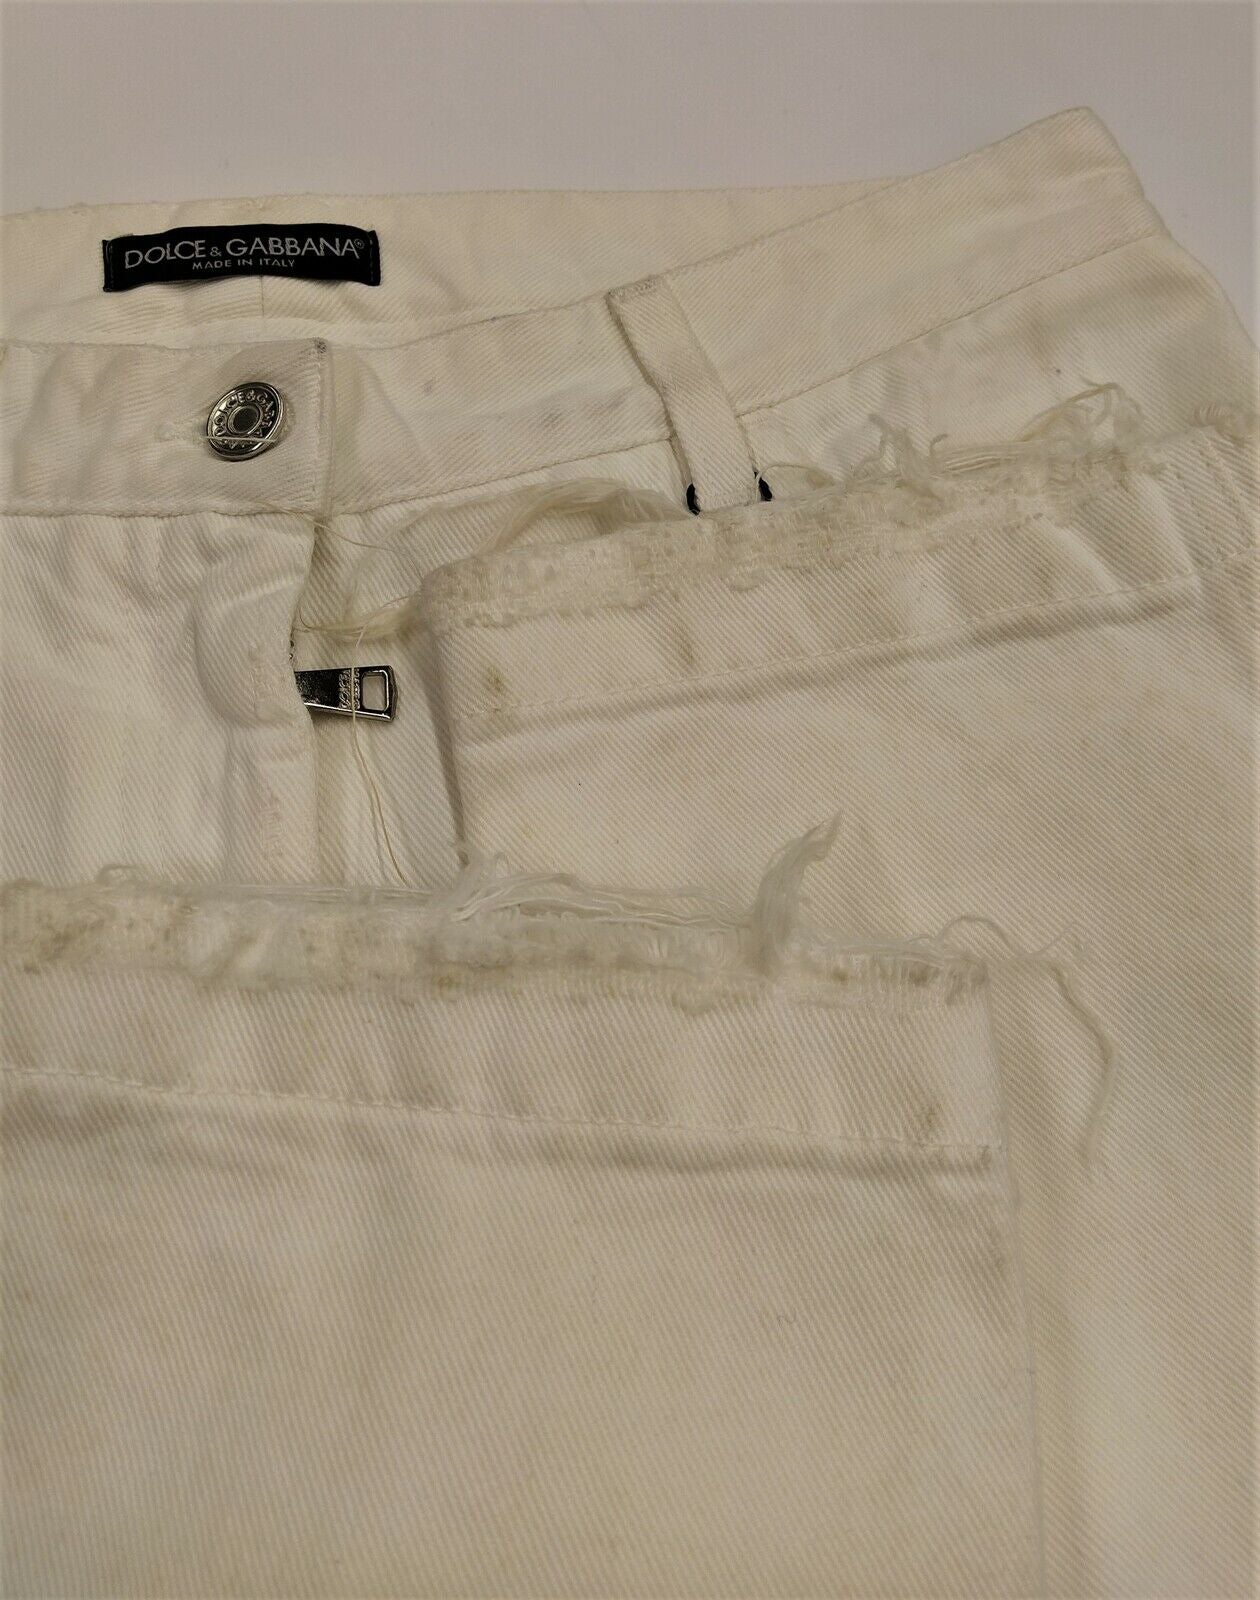 DOLCE & GABBANA Jeans Size XS Distressed Made in Italy